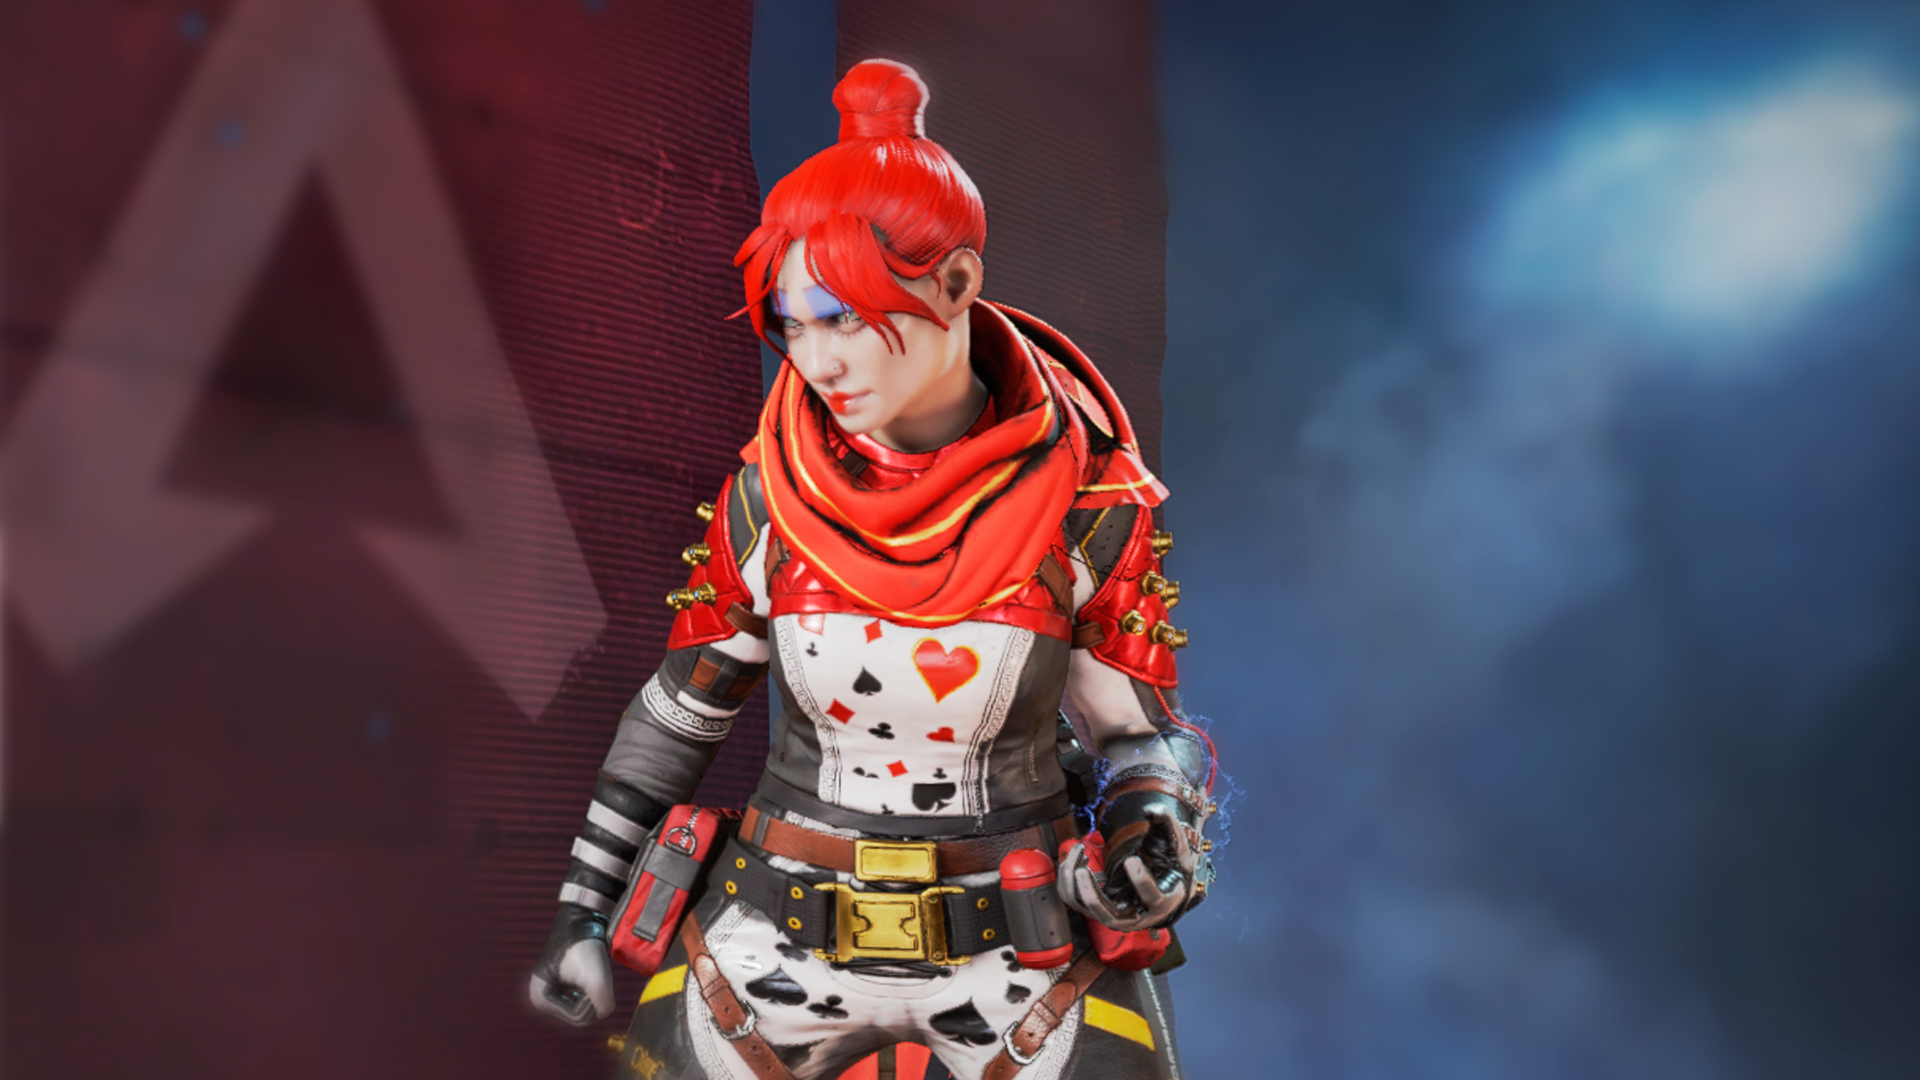 Apex Legends Wraith Skin: Queen of Hearts.